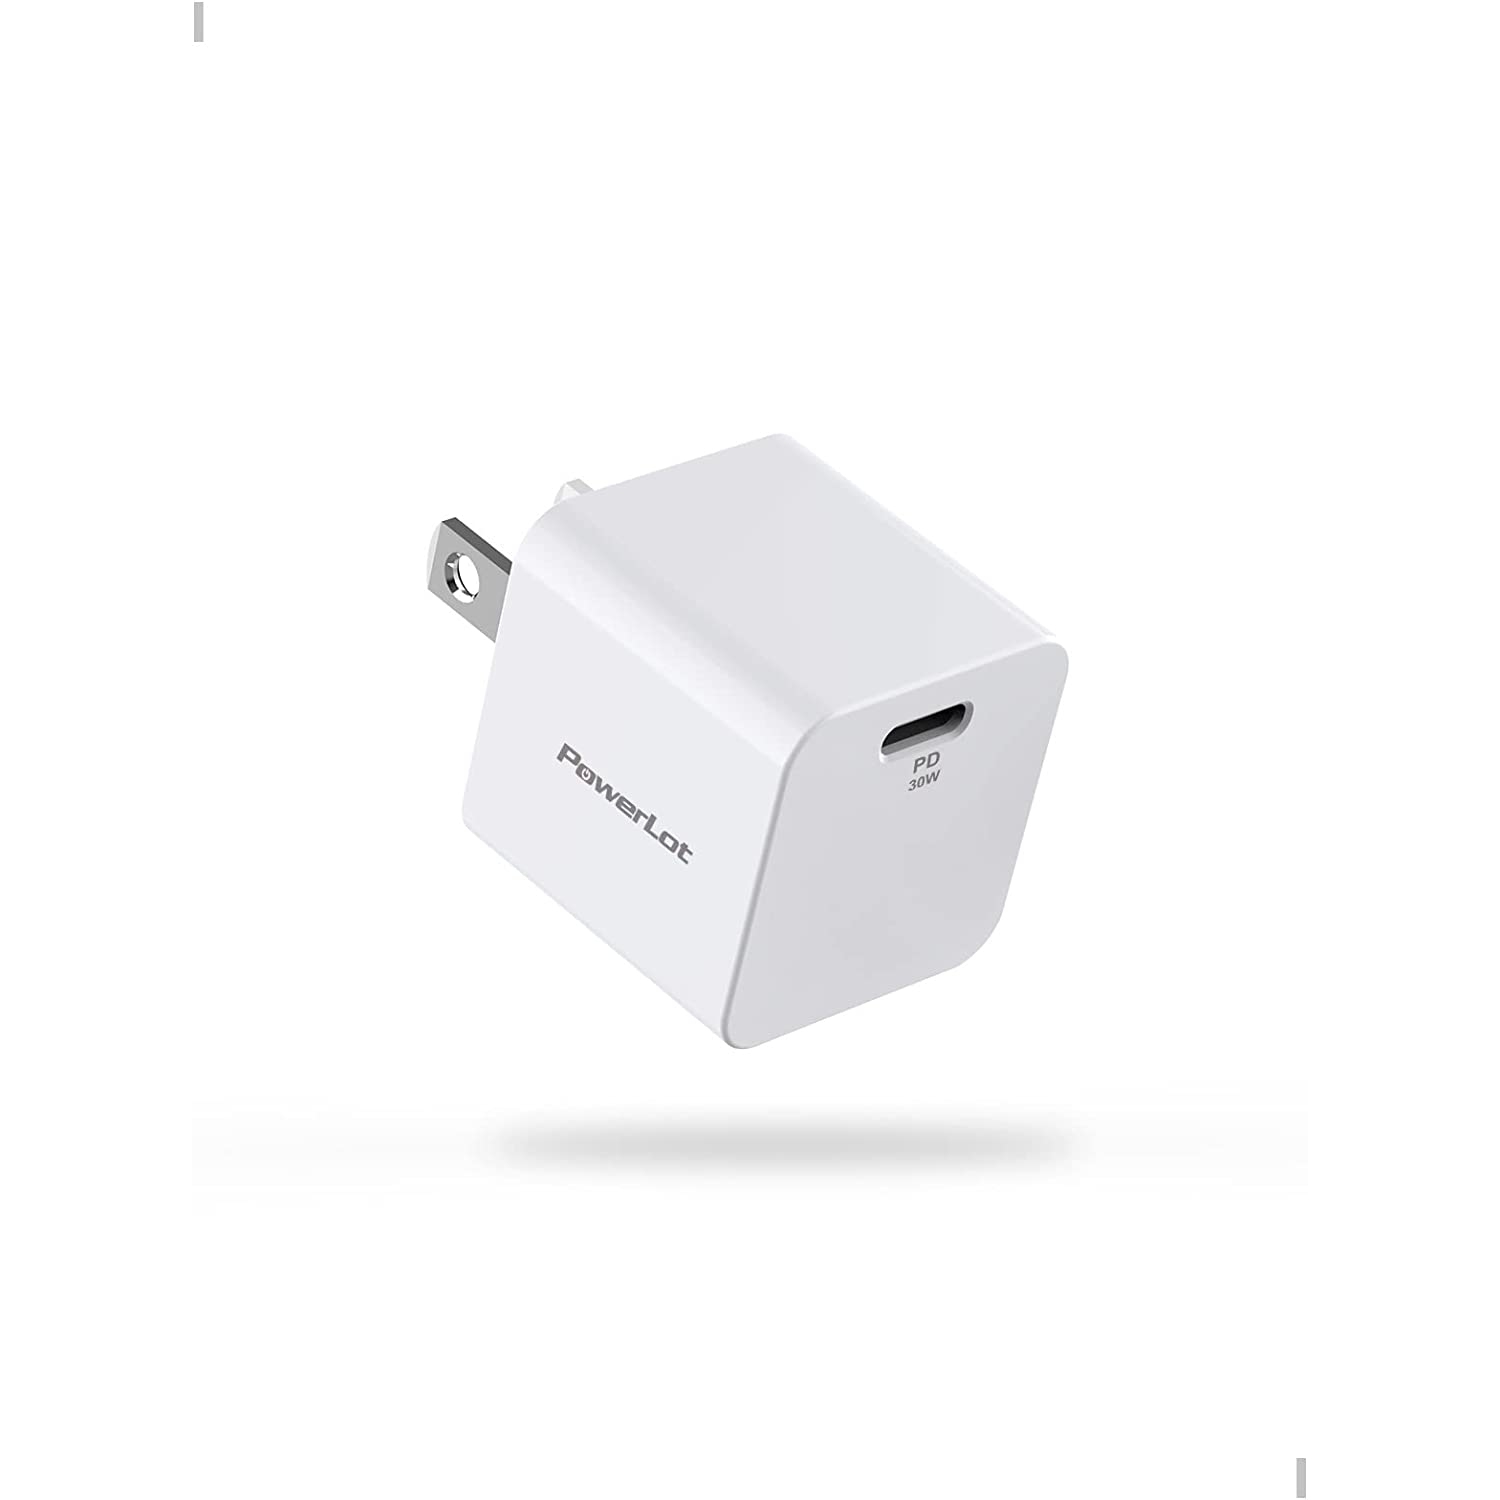 30W USB-C Power Adapter, GaN III USB C Wall Charger, PD Fast Charger for iPhone 13 Pro Max, Pixel 6/6 Pro